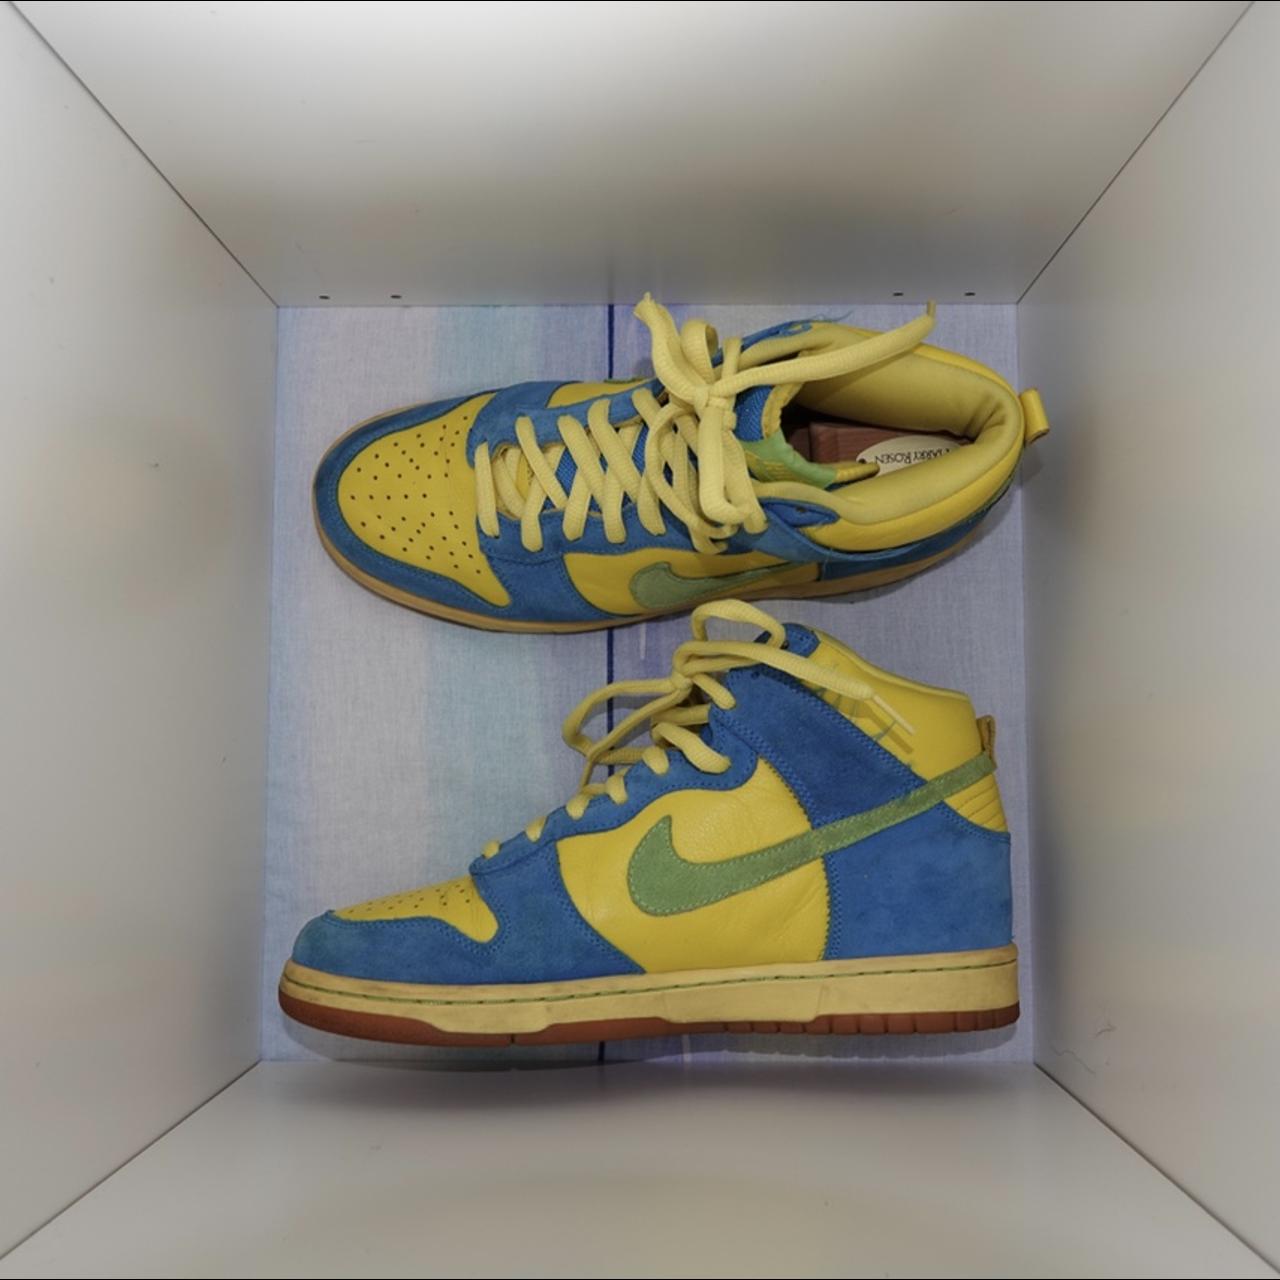 Nike Men's Blue and Yellow Depop